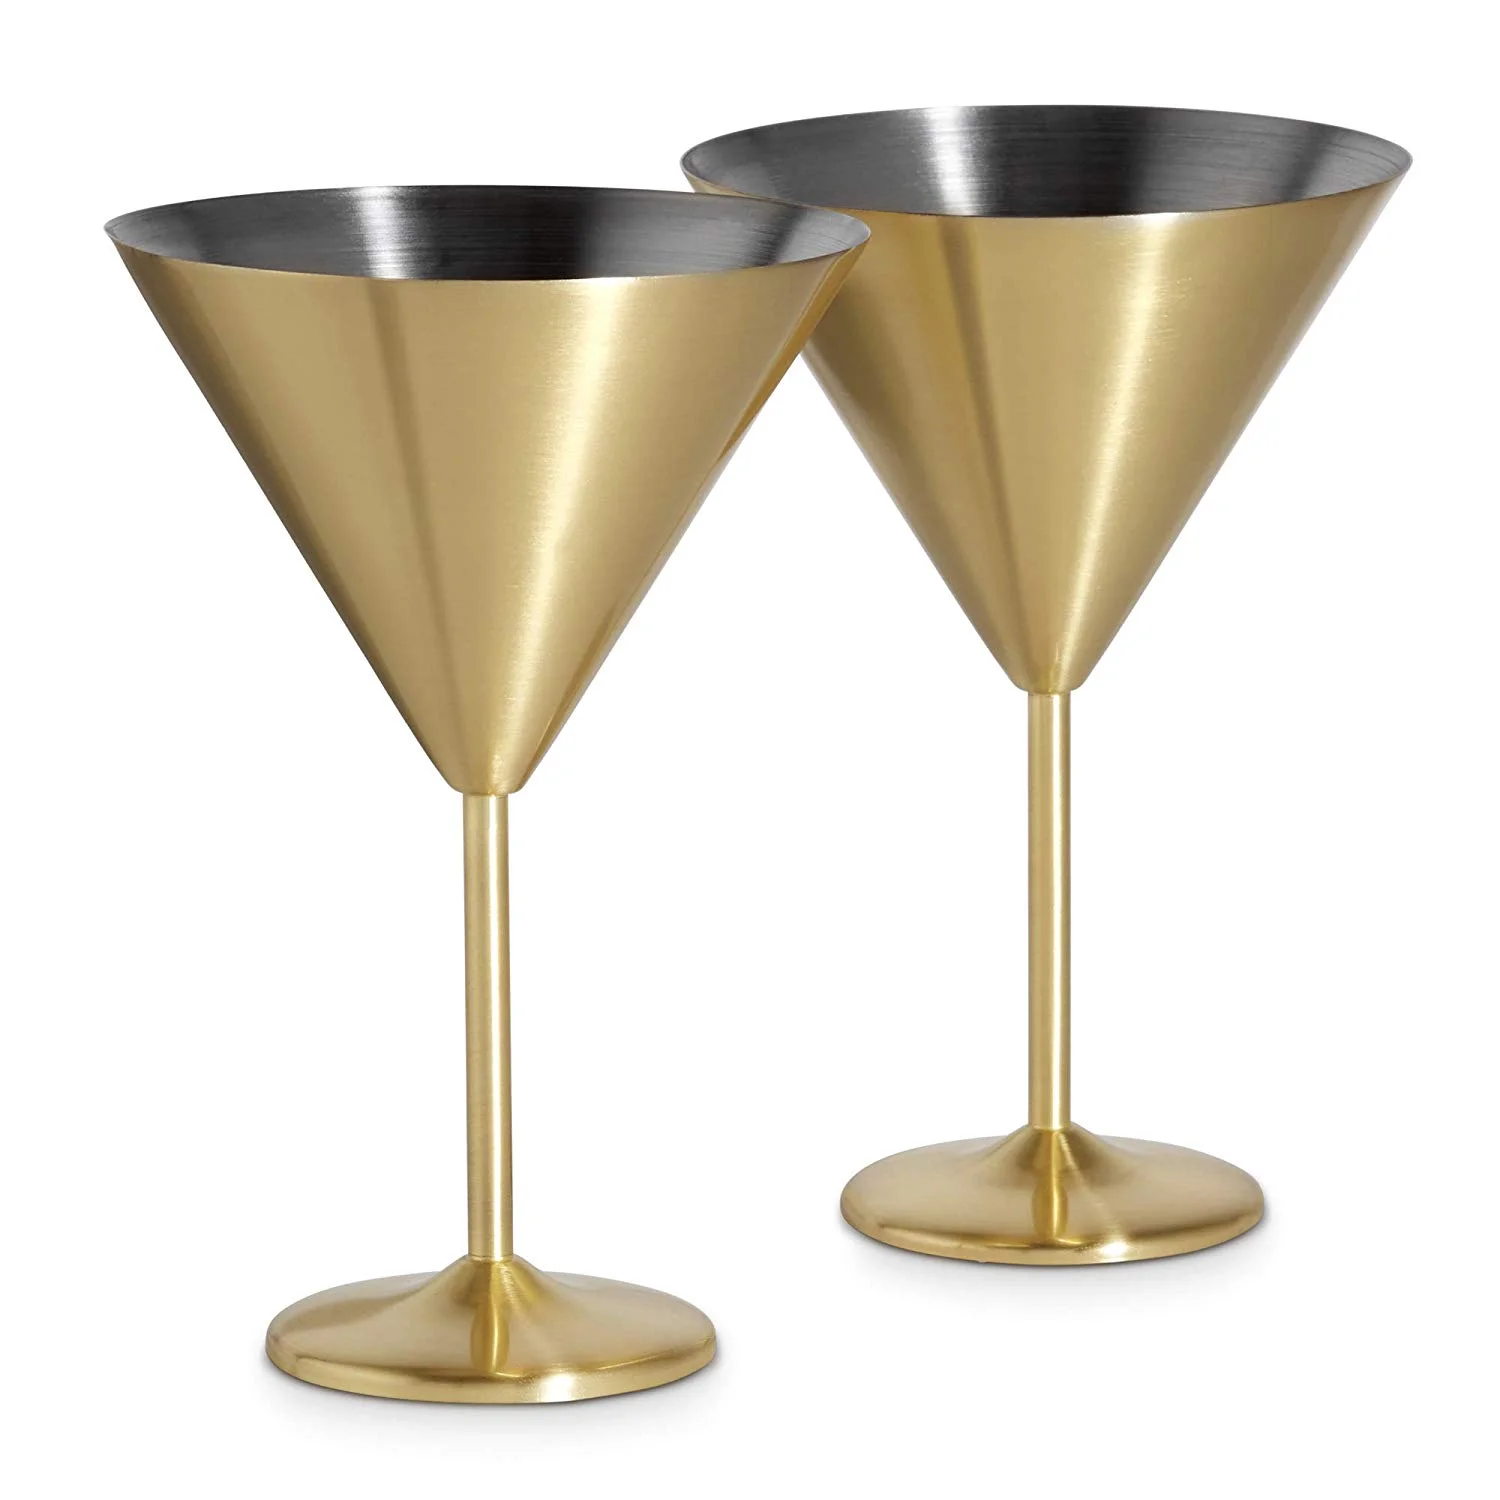 Stainless Steel Martini Glass, Set of 2 Light Gold